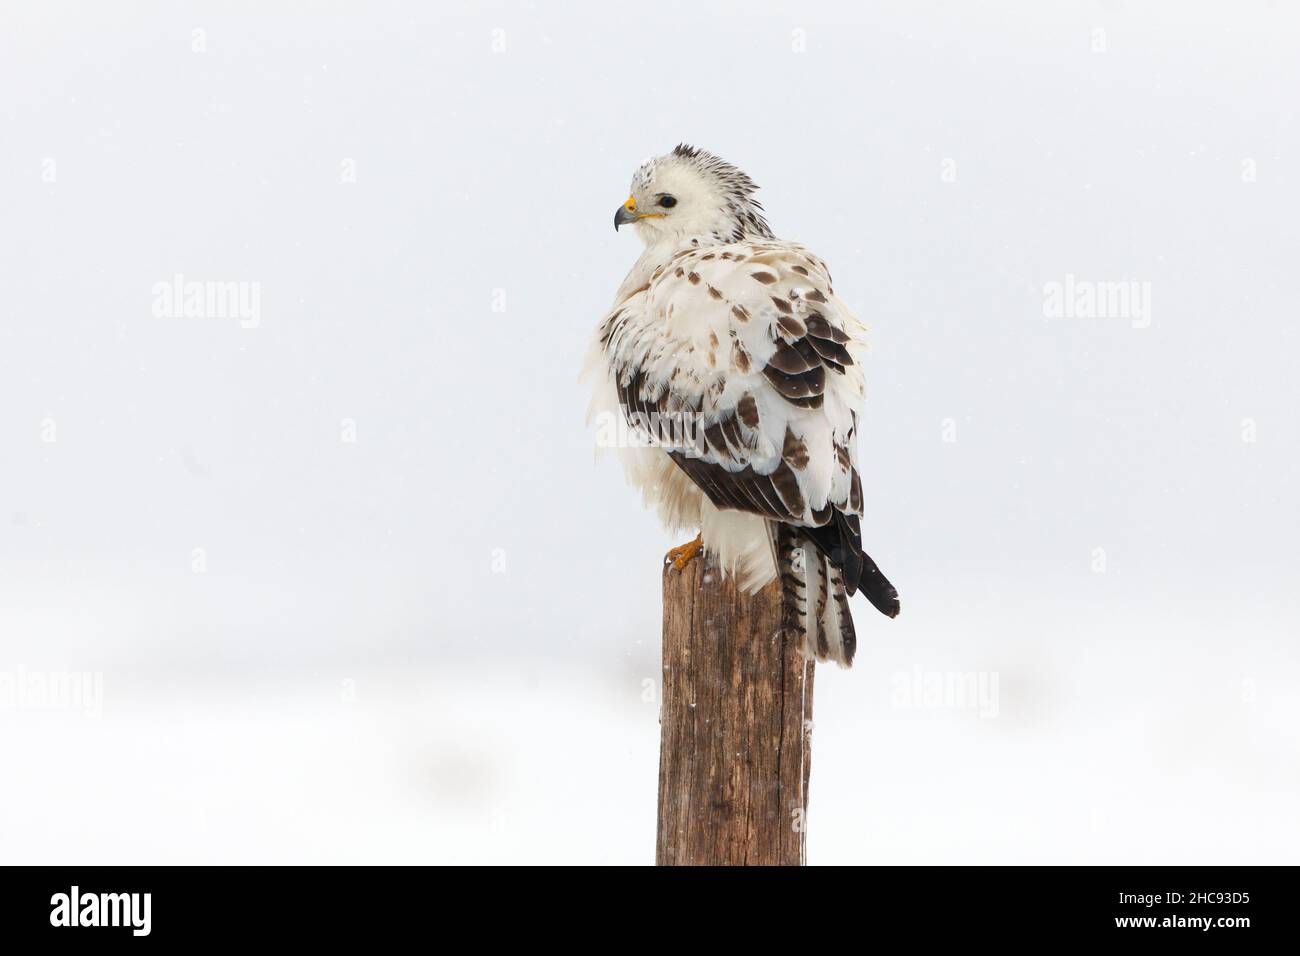 Common Buzzard, (Buteo buteo), with white plumage, perched on post, in winter, Lower Saxony, Germany Stock Photo